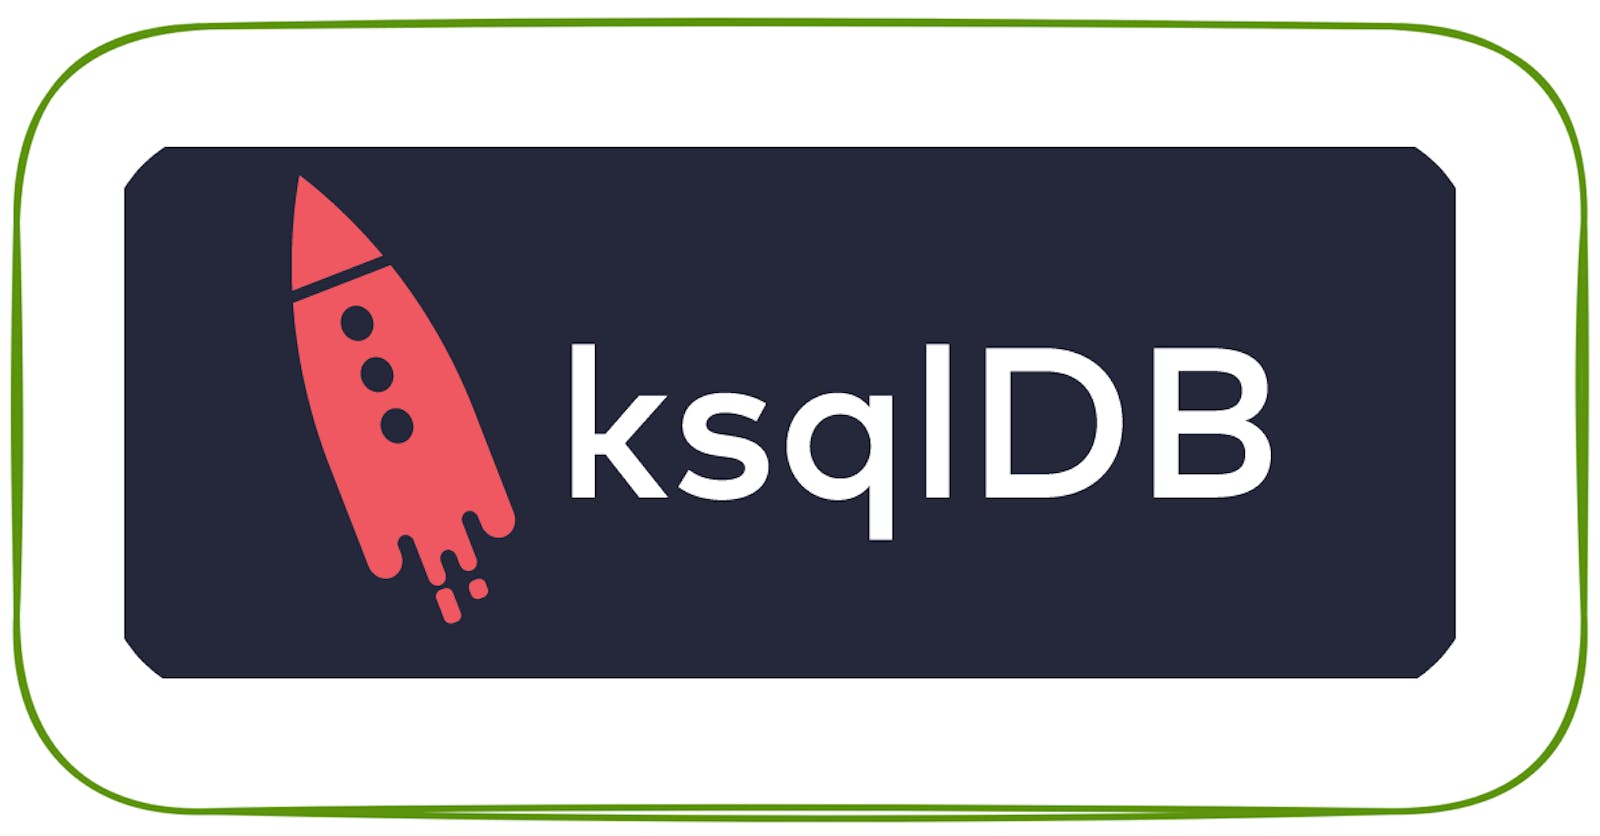 Filter Apache Kafka Messages on the Fly with ksqlDB